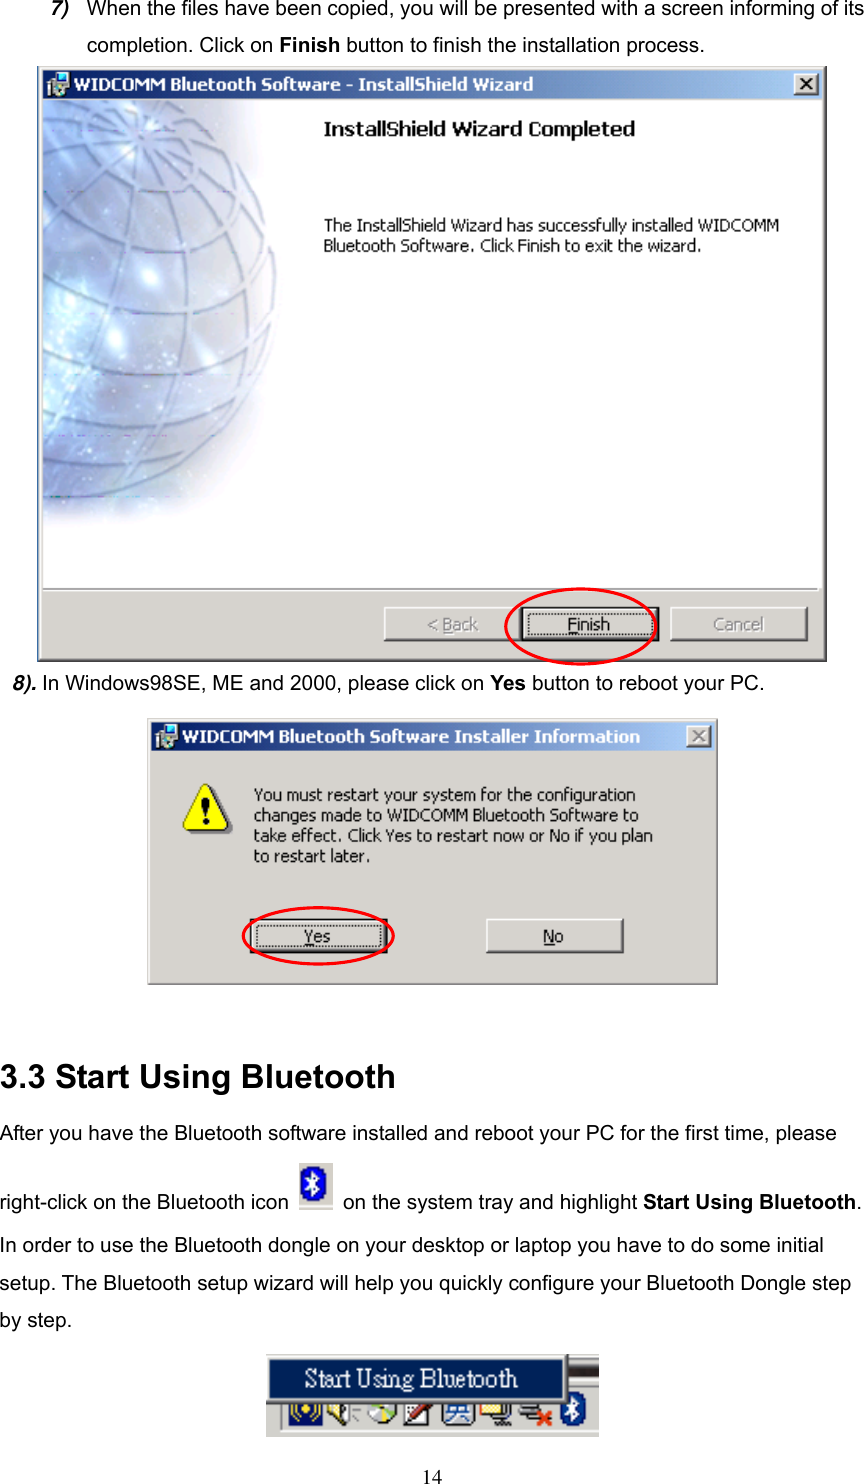 7)  When the files have been copied, you will be presented with a screen informing of its completion. Click on Finish button to finish the installation process.  8). In Windows98SE, ME and 2000, please click on Yes button to reboot your PC.   3.3 Start Using Bluetooth After you have the Bluetooth software installed and reboot your PC for the first time, please right-click on the Bluetooth icon    on the system tray and highlight Start Using Bluetooth. In order to use the Bluetooth dongle on your desktop or laptop you have to do some initial setup. The Bluetooth setup wizard will help you quickly configure your Bluetooth Dongle step by step.     14 